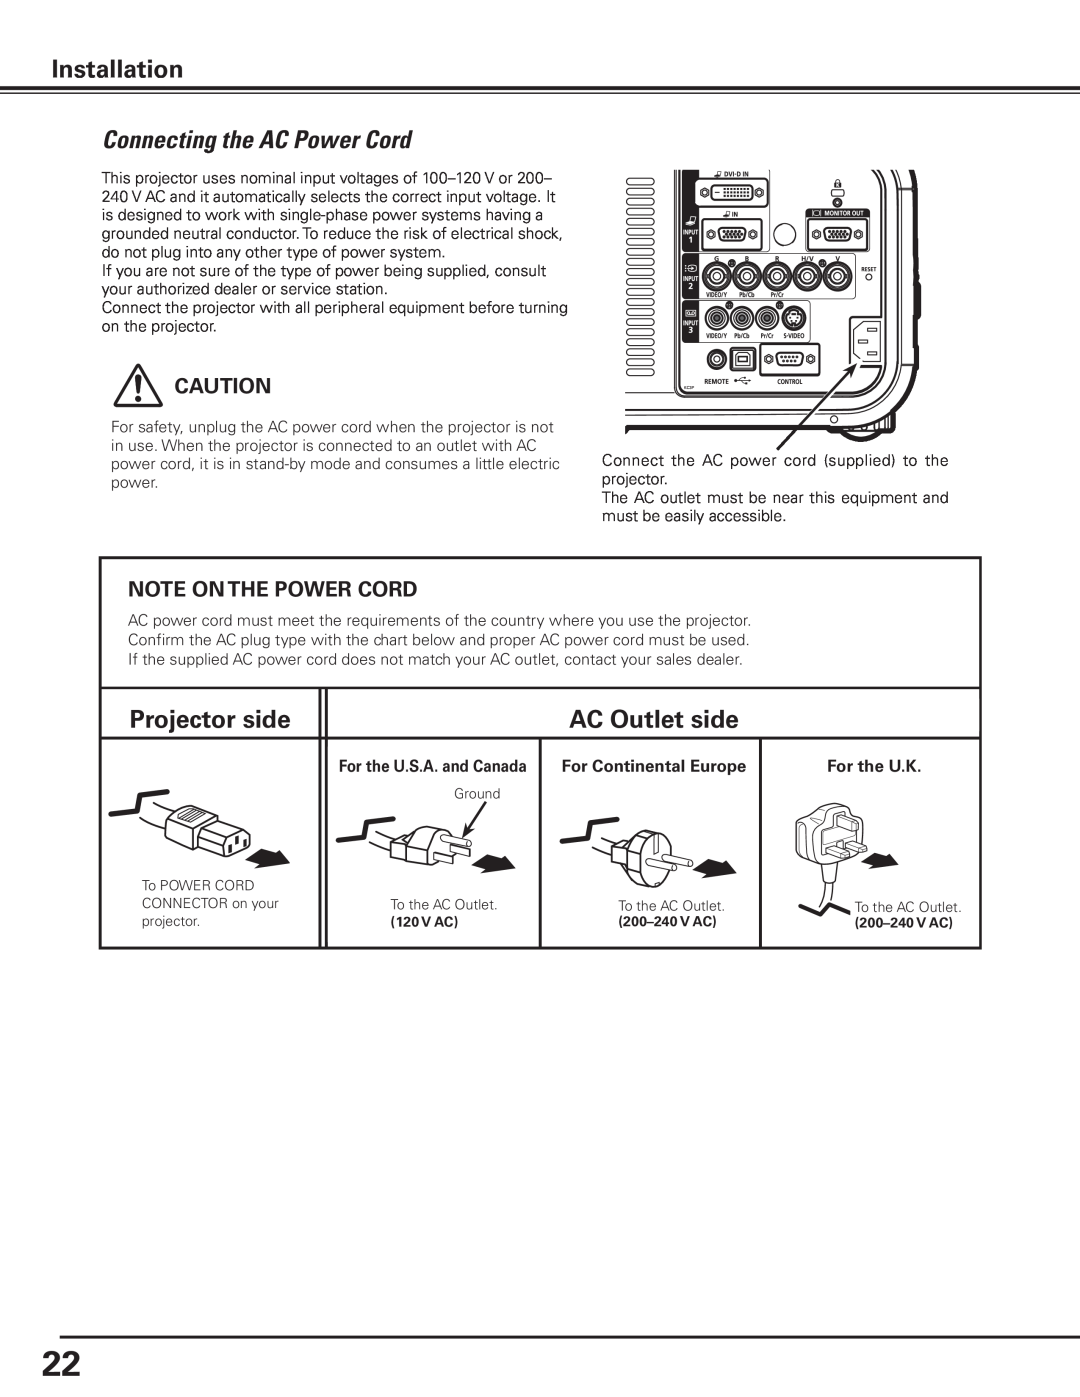 Canon 7585 manual Connecting the AC Power Cord, Projector side, AC Outlet side, Installation, For the U.S.A. and Canada 